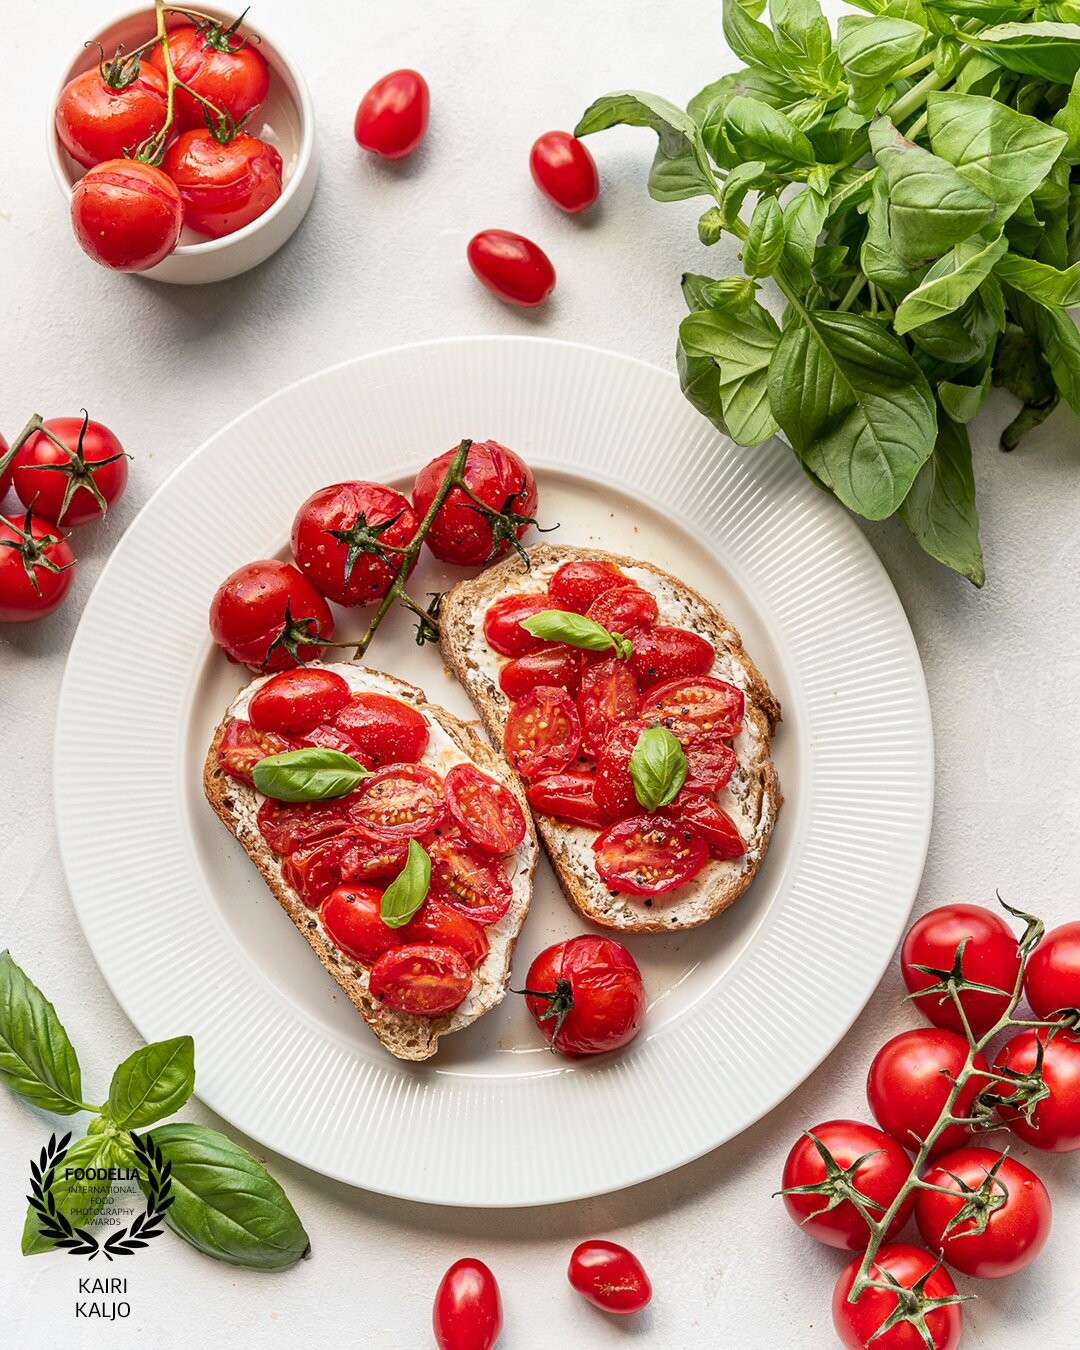 Love shooting fresh seasonal produce and simple dishes that hero the produce. Bruschetta reminds me of my travels to Italy a few years ago and an Italian cooking class in Florence, but in all honesty, I grew up on tomato and cucumber sandwiches. It's great they also make a great photo.